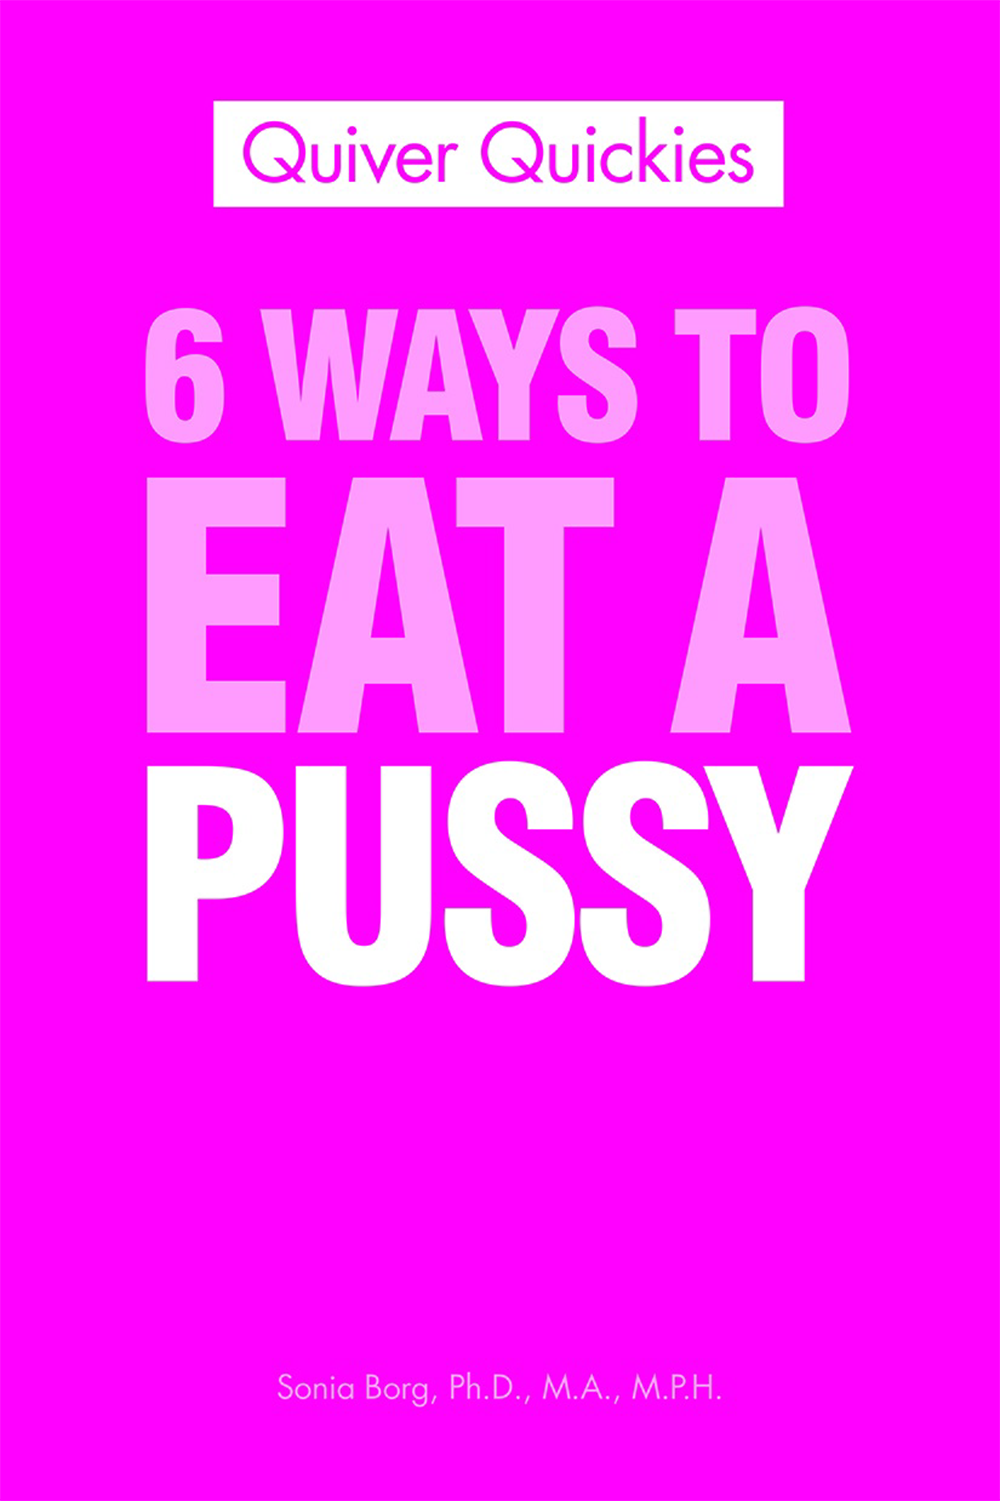 Eating pussy to steps Whole Family